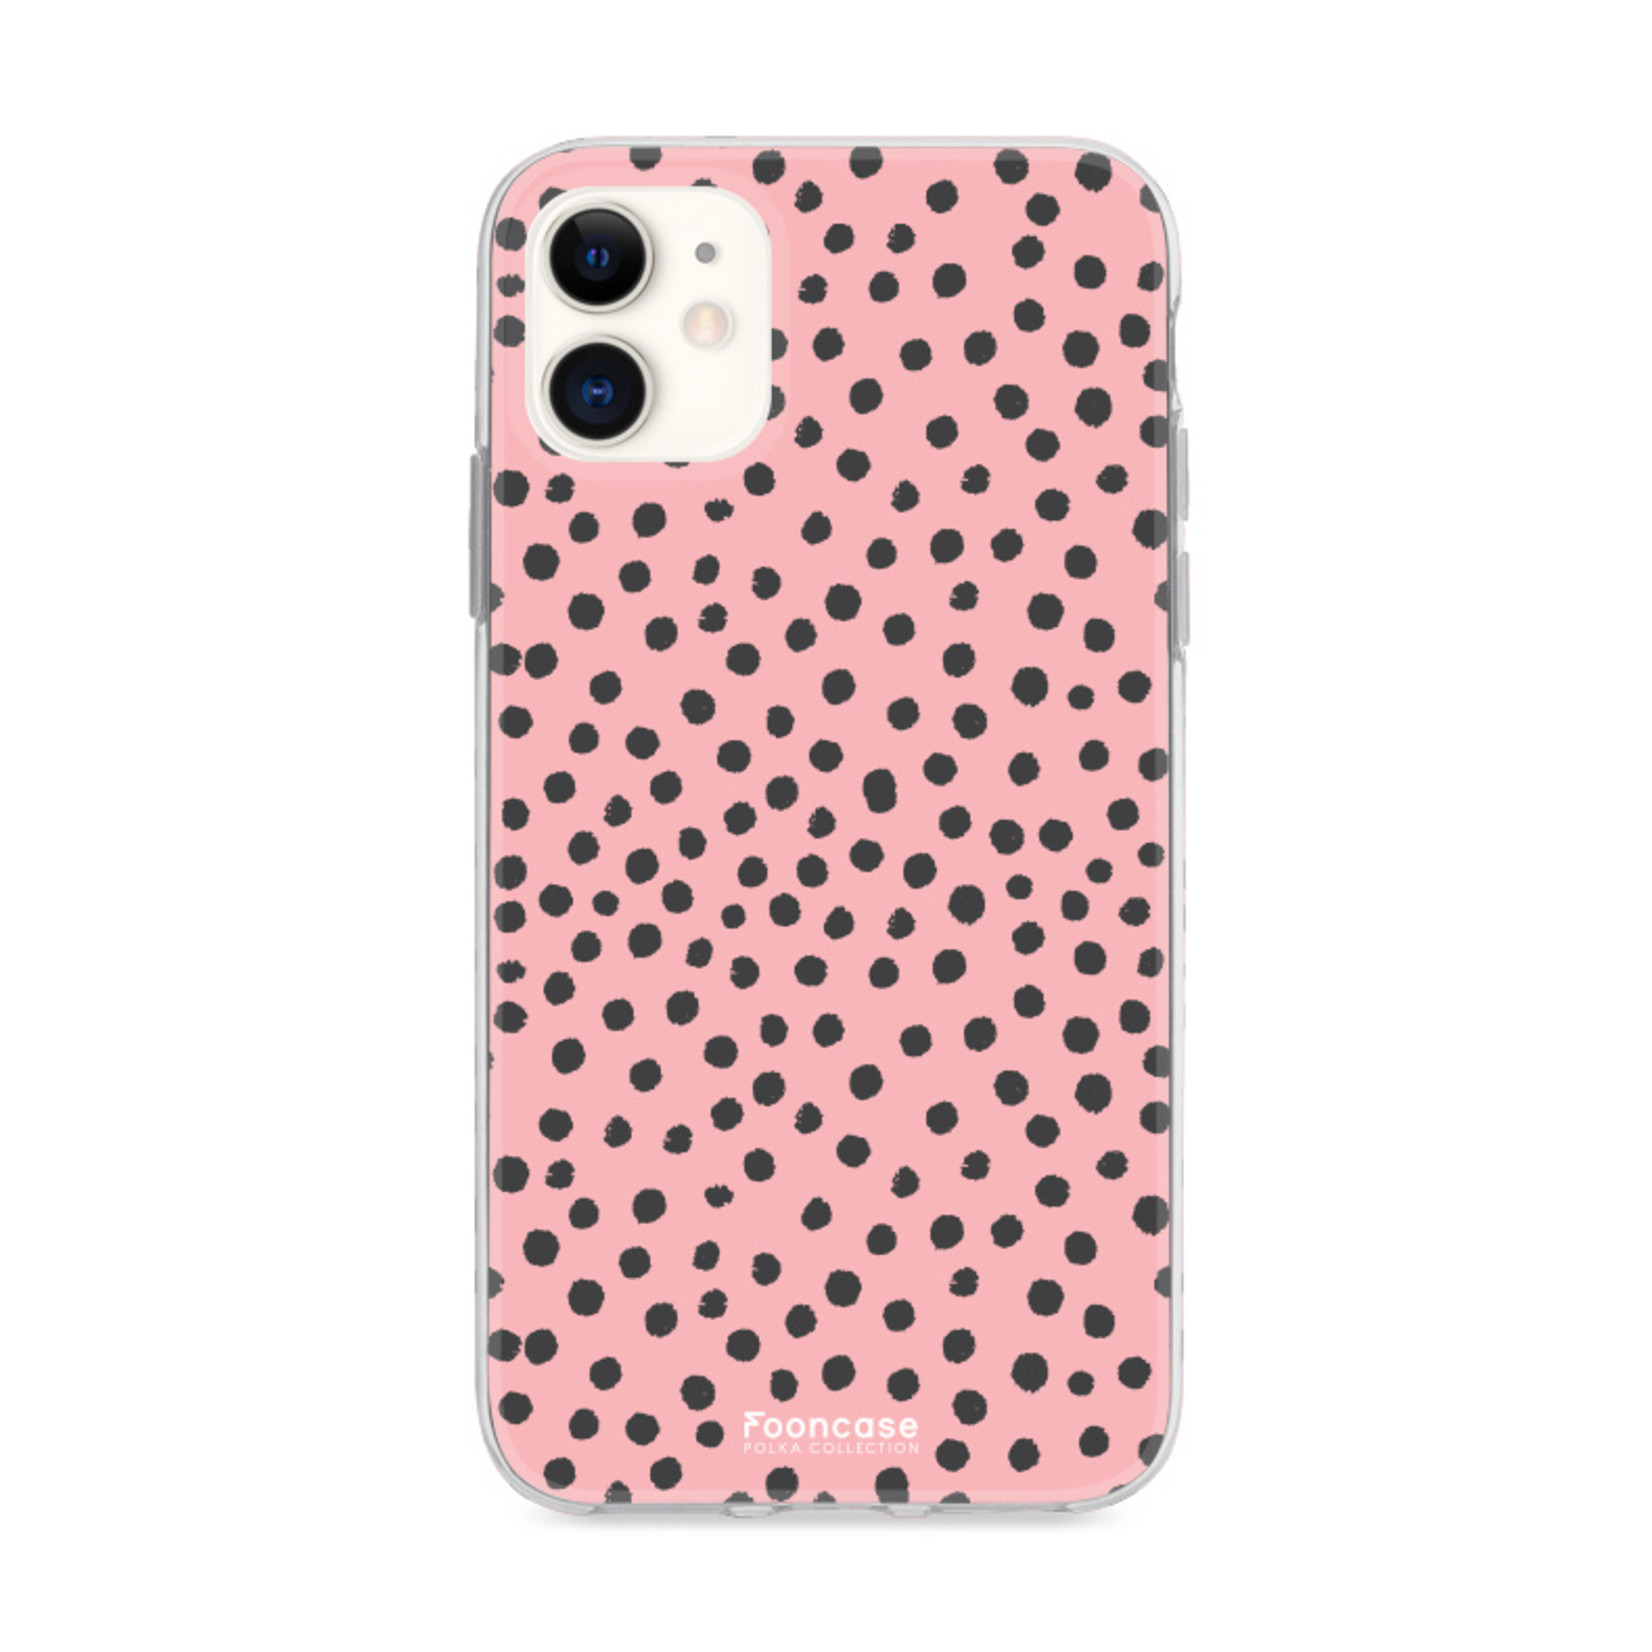 FOONCASE Iphone 12 - POLKA COLLECTION / Rosa